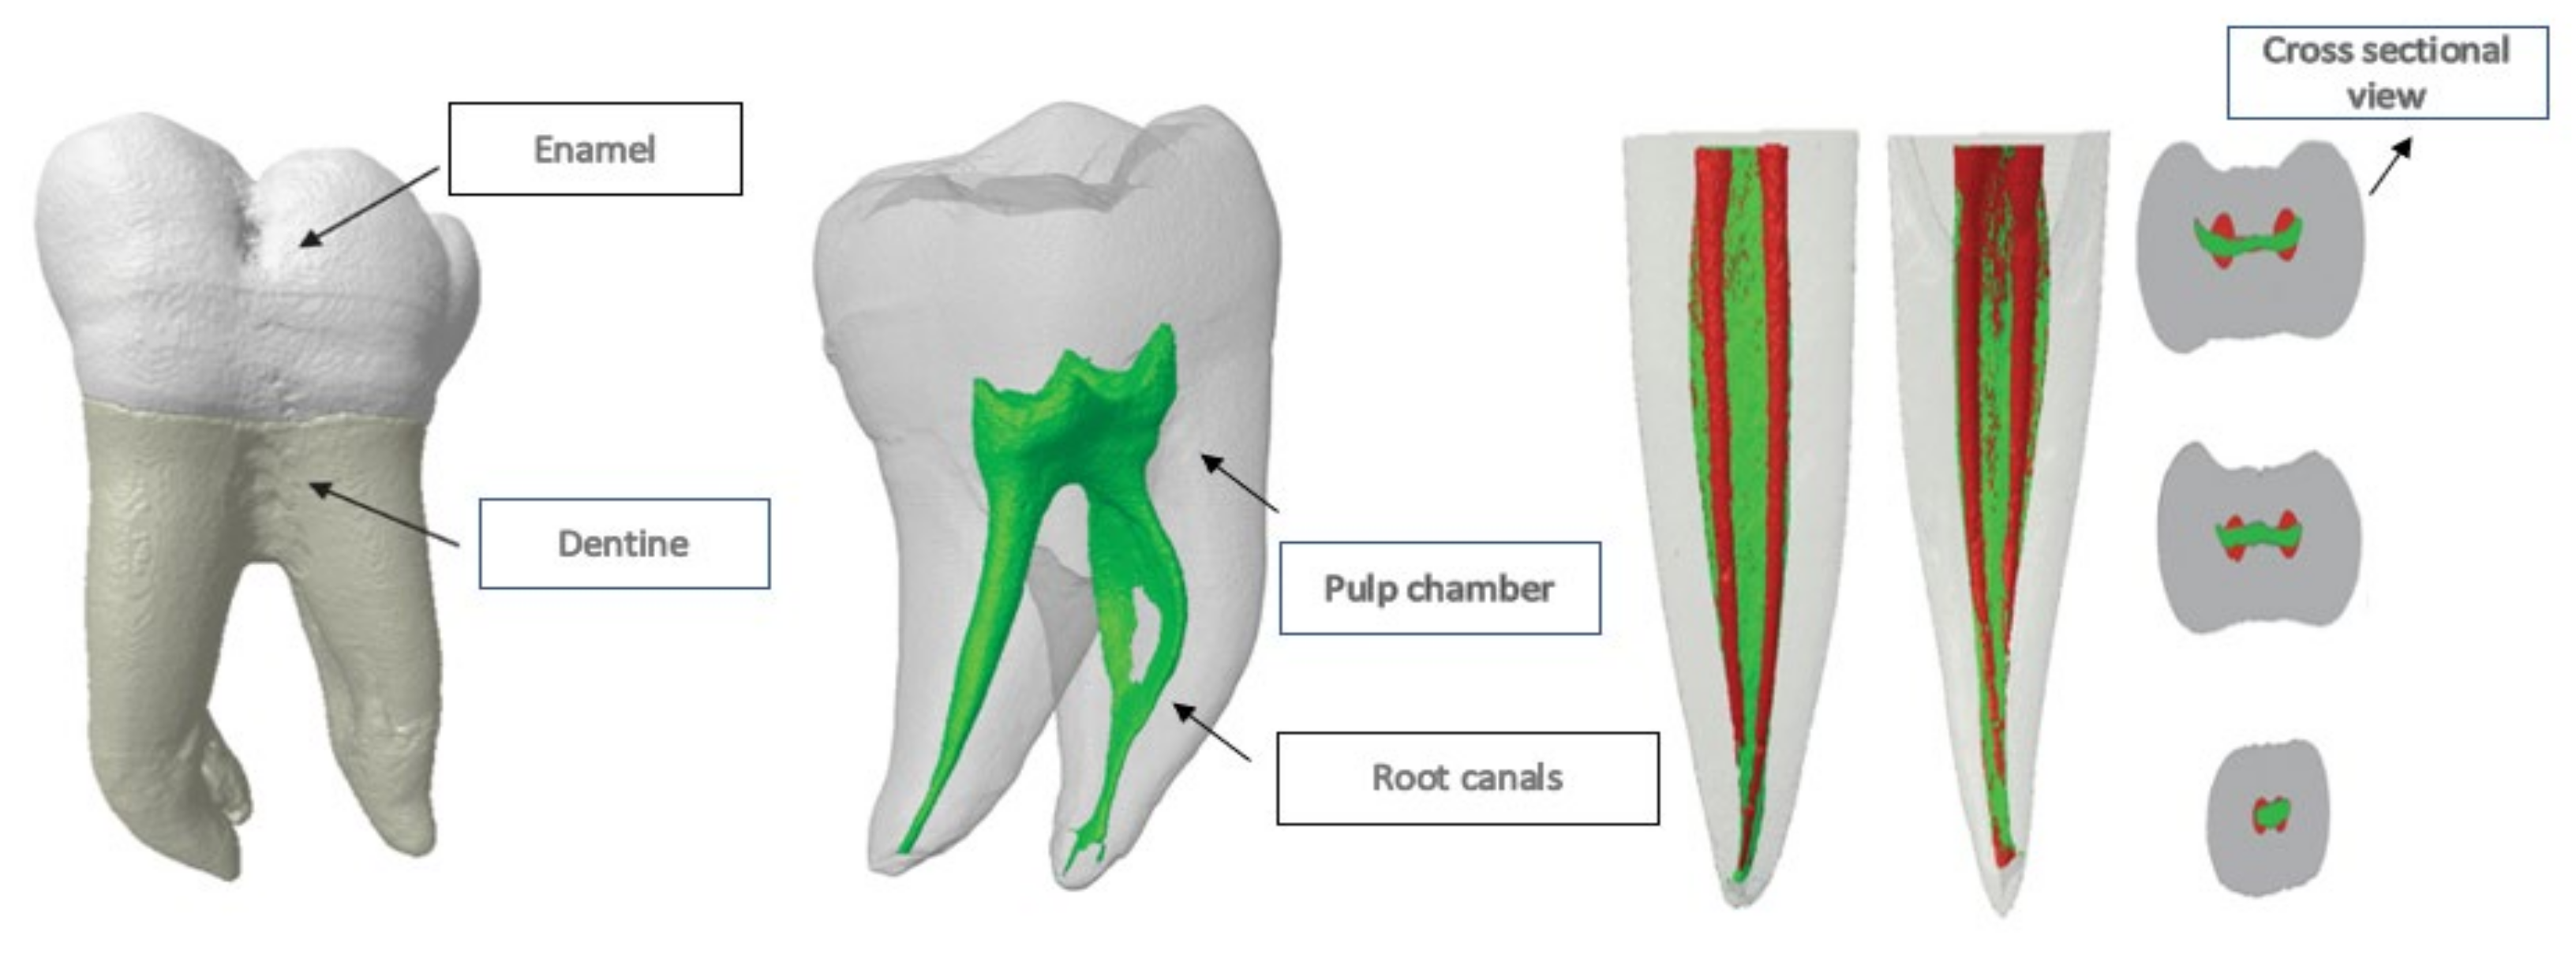 3D Visual Glossary of Terminology in Root and Root Canal Anatomy